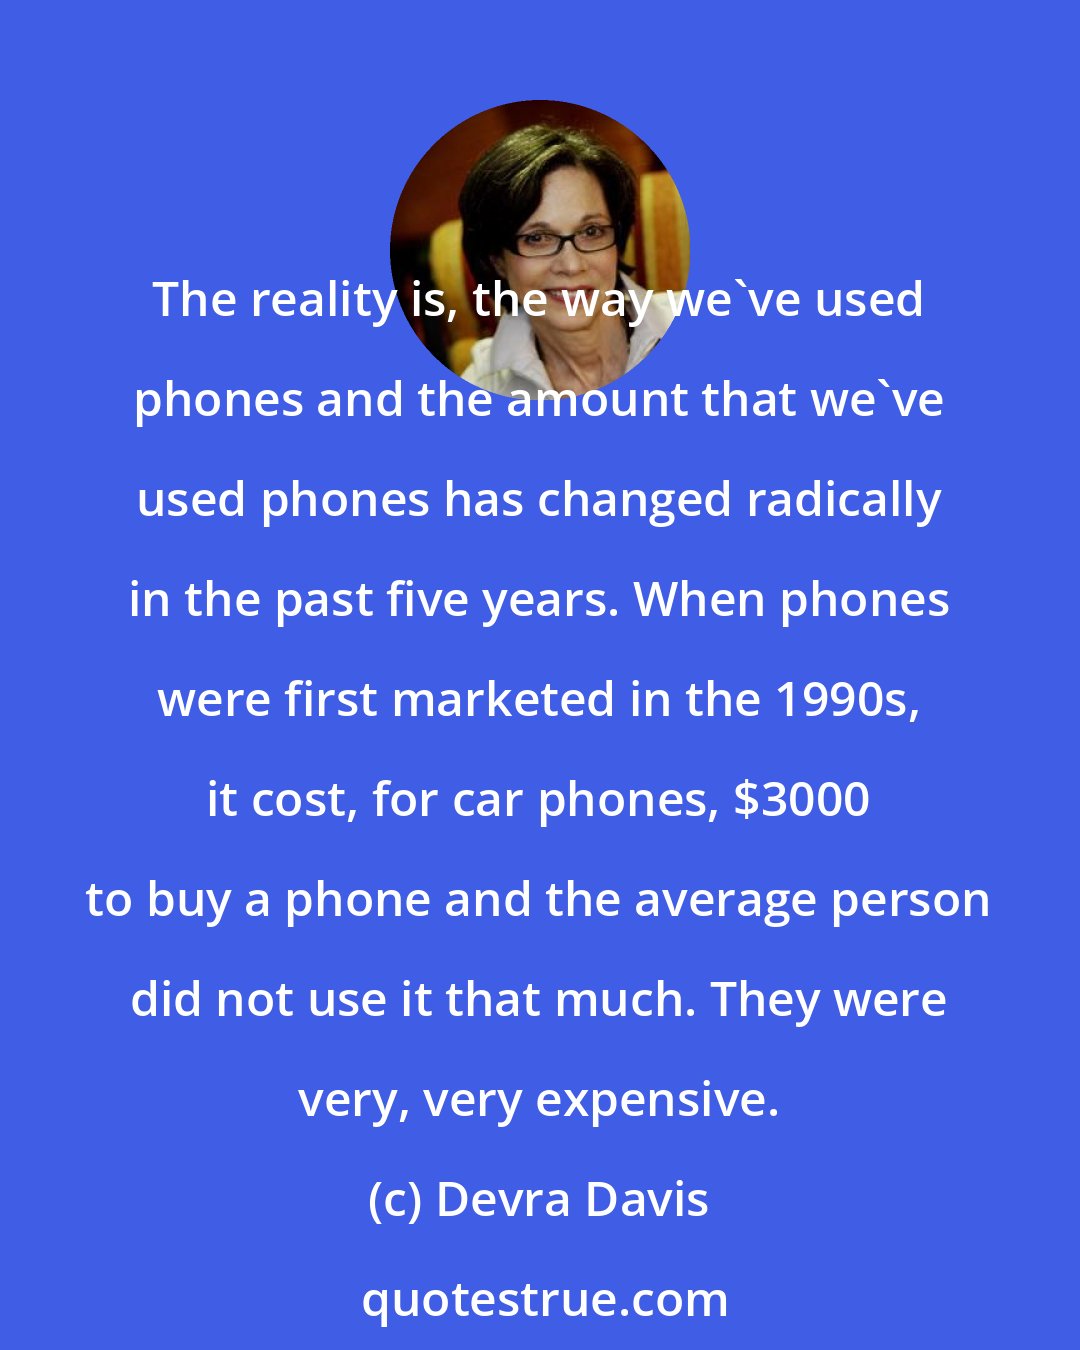 Devra Davis: The reality is, the way we've used phones and the amount that we've used phones has changed radically in the past five years. When phones were first marketed in the 1990s, it cost, for car phones, $3000 to buy a phone and the average person did not use it that much. They were very, very expensive.